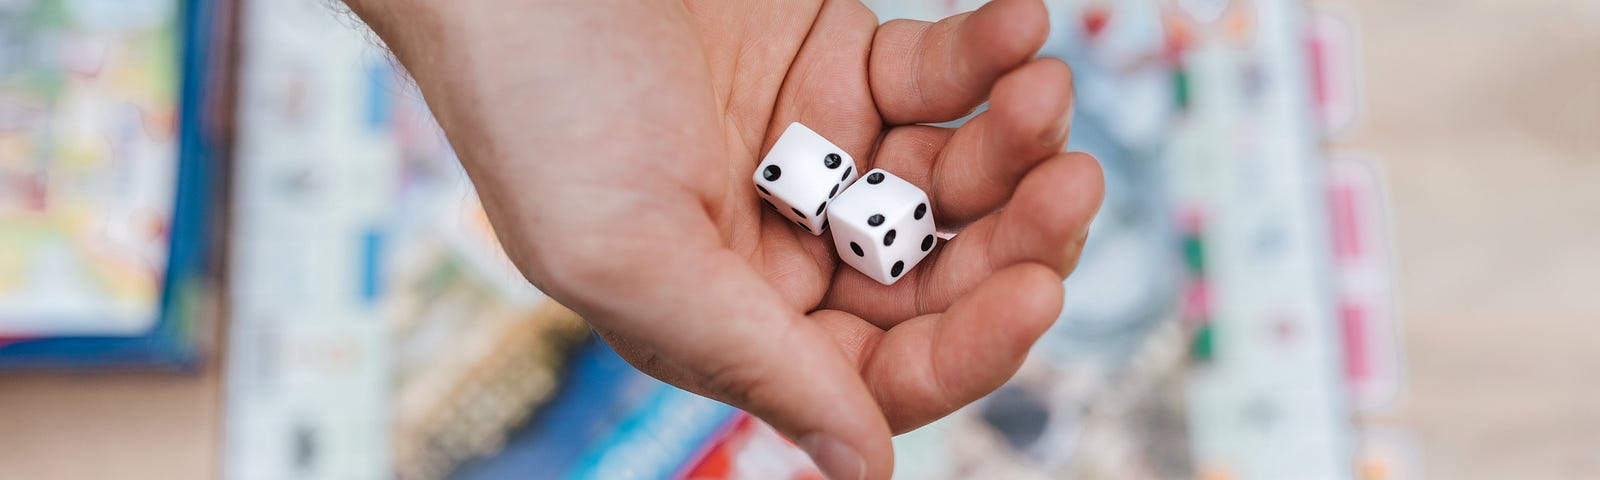 A hand holding two dice above a monopoly board game